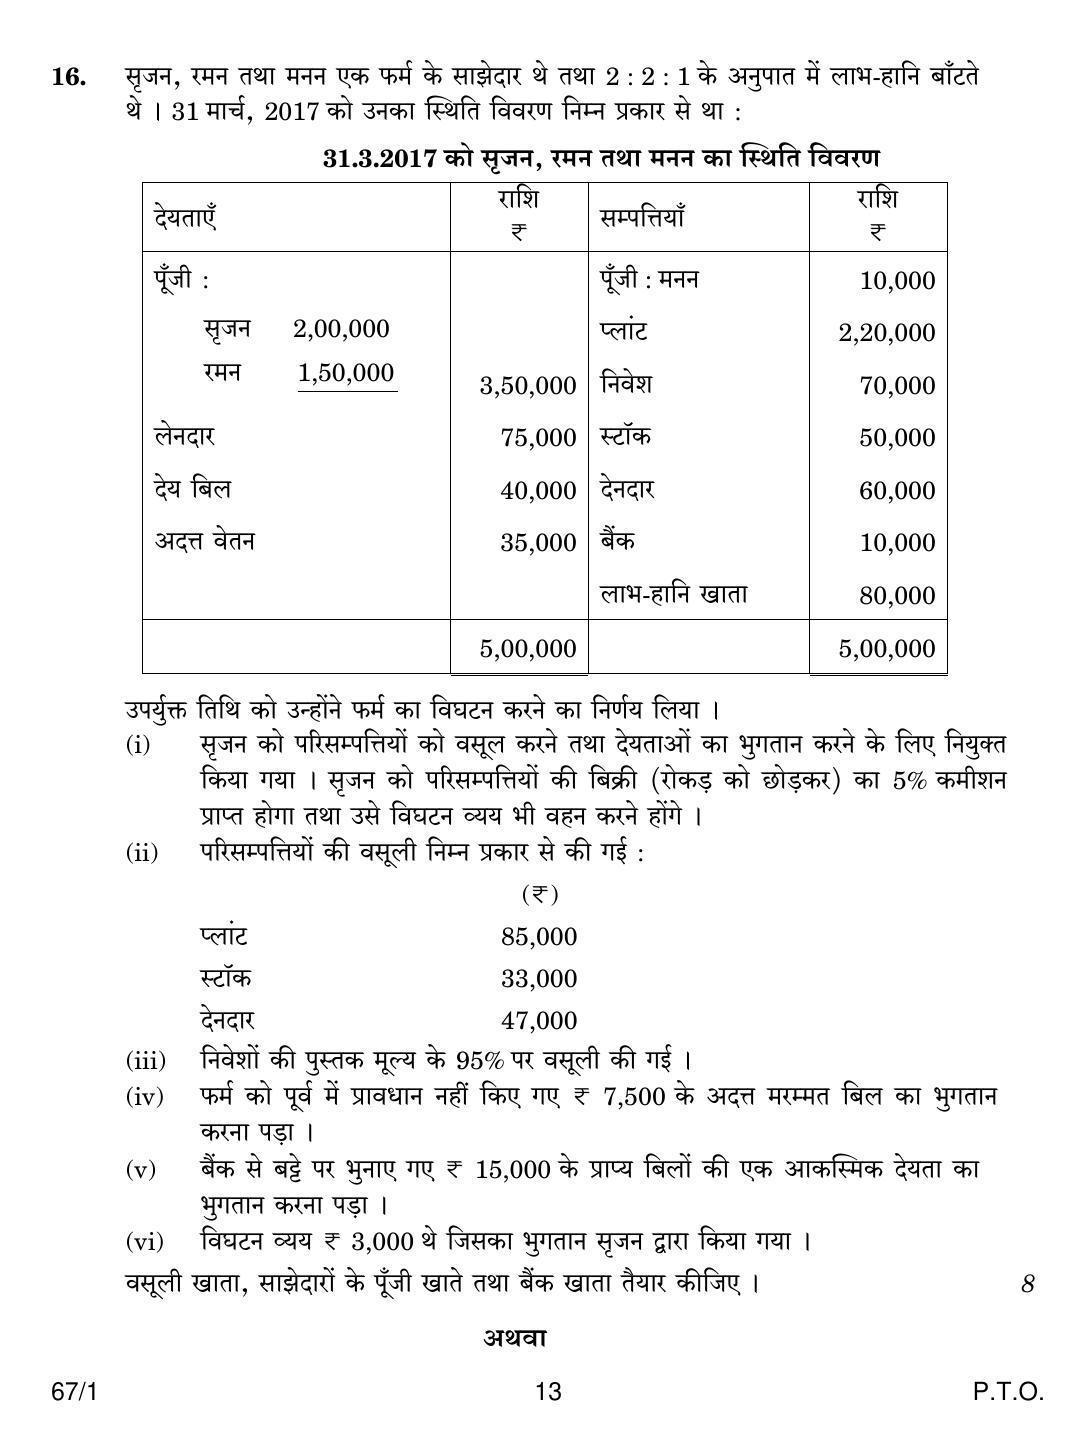 CBSE Class 12 67-1 ACCOUNTANCY 2018 Question Paper - Page 13